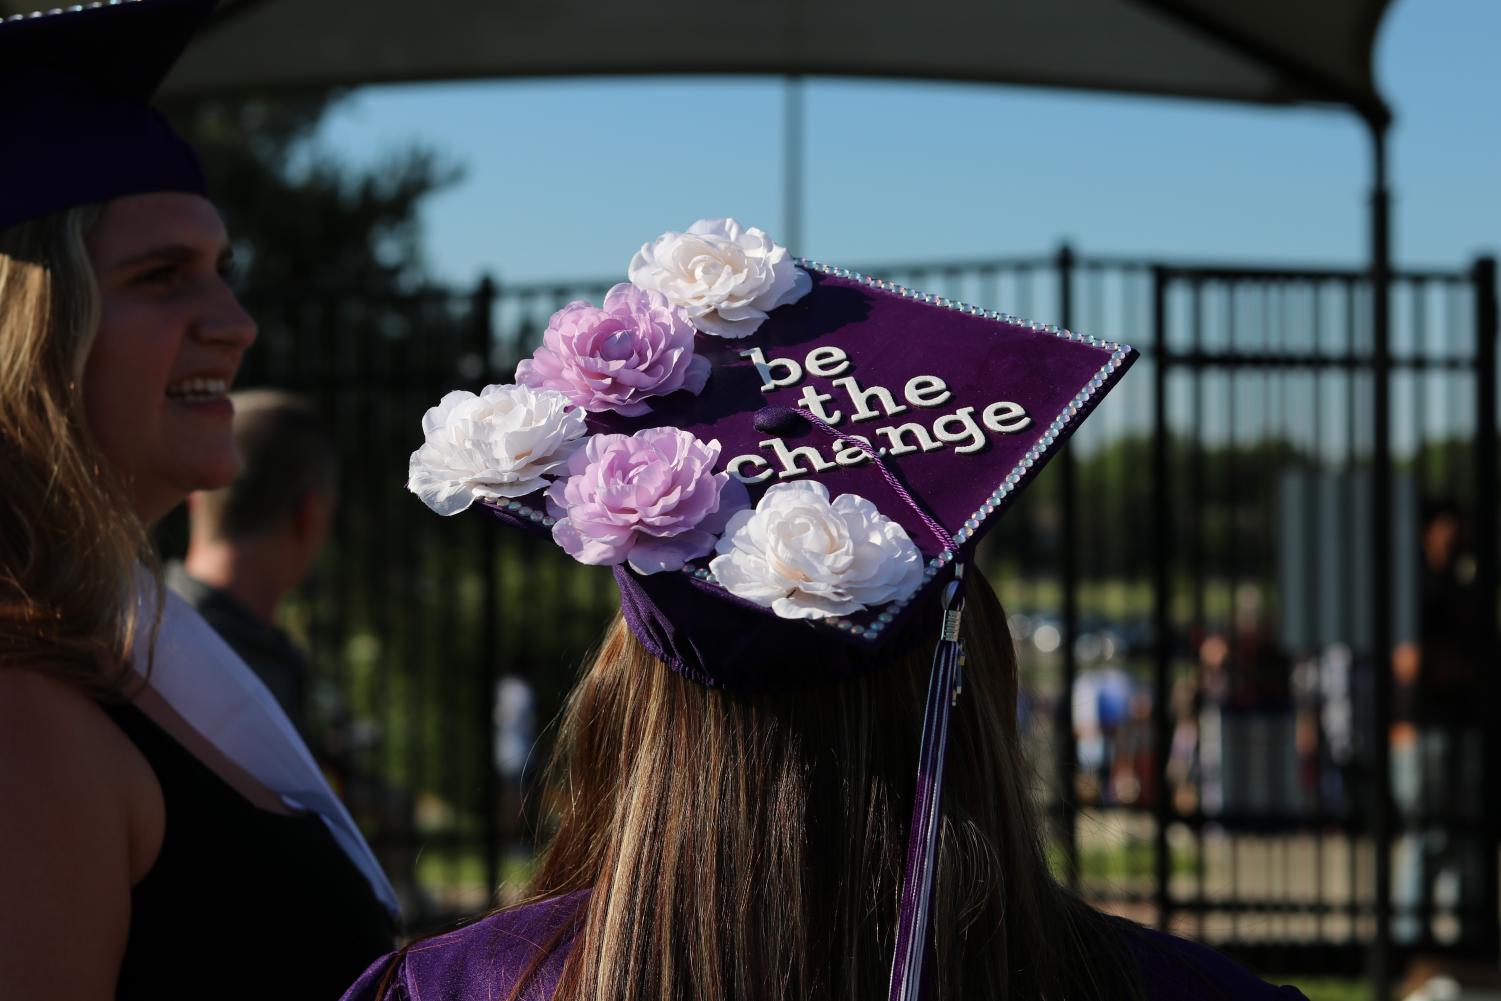 Photos+from+the+Pioneer+2021+Commencement+Ceremony+%26+Senior+Plans